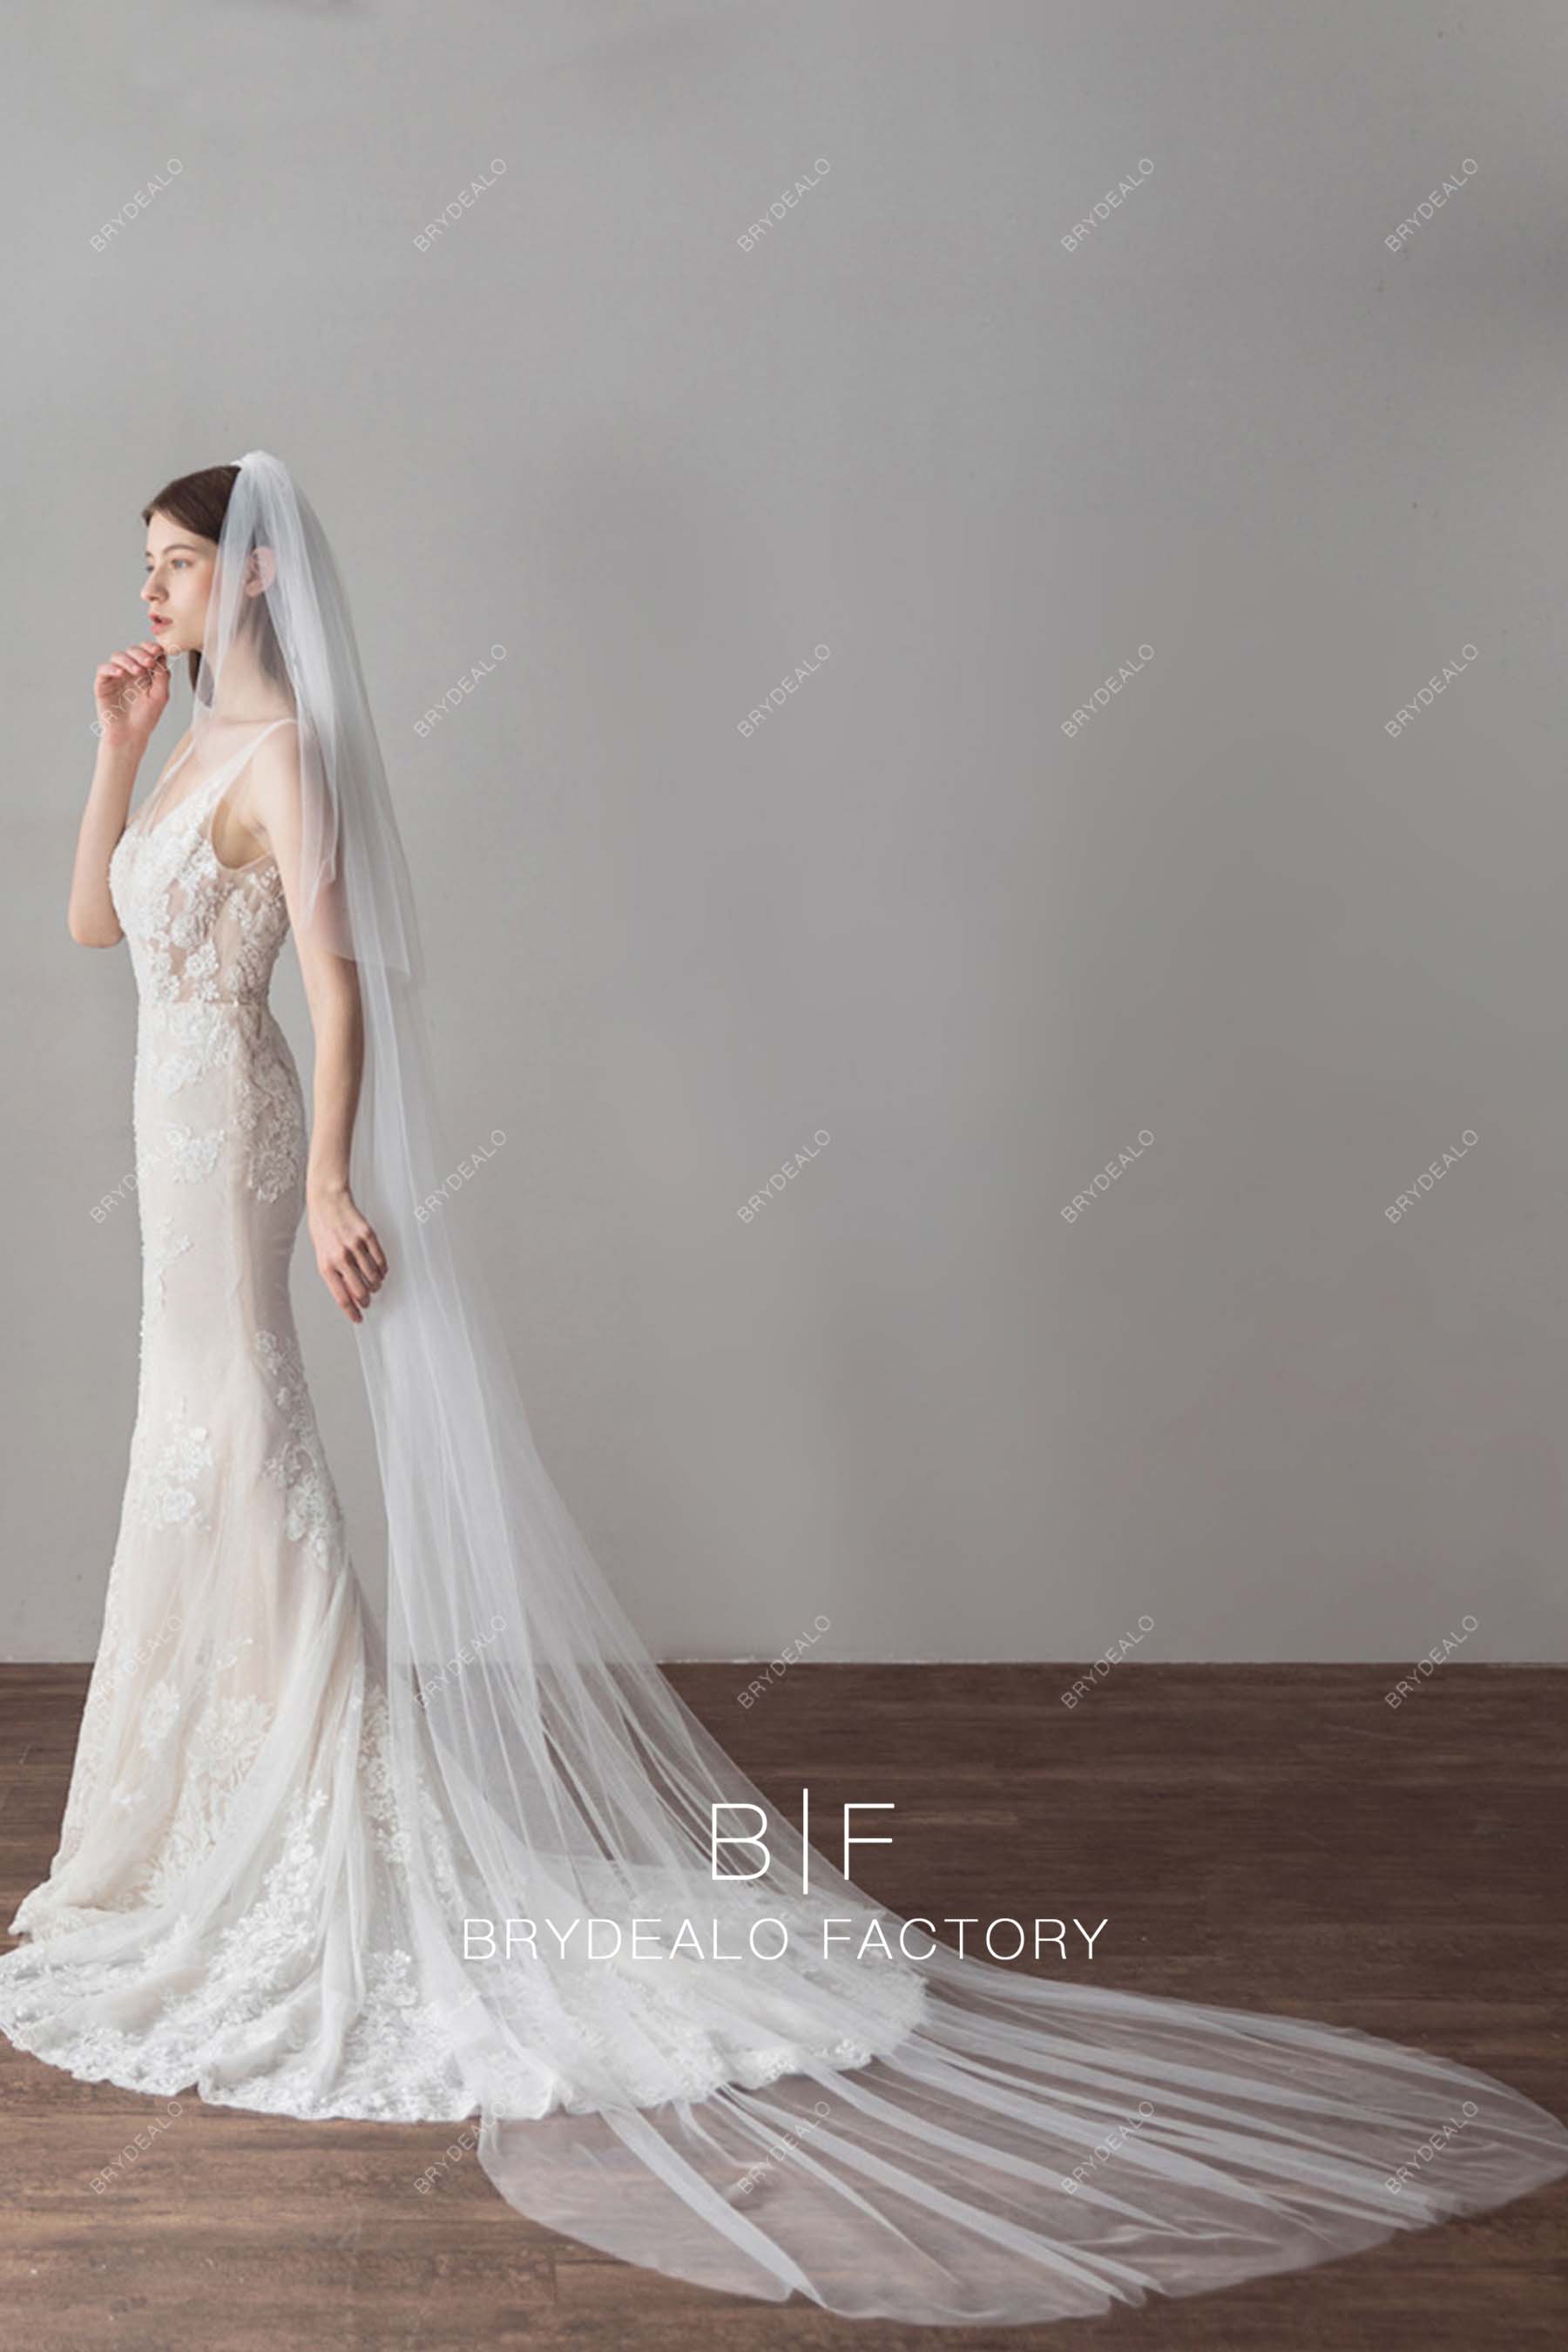 Cathedral Length Elegant Two Tiered Bridal Veil